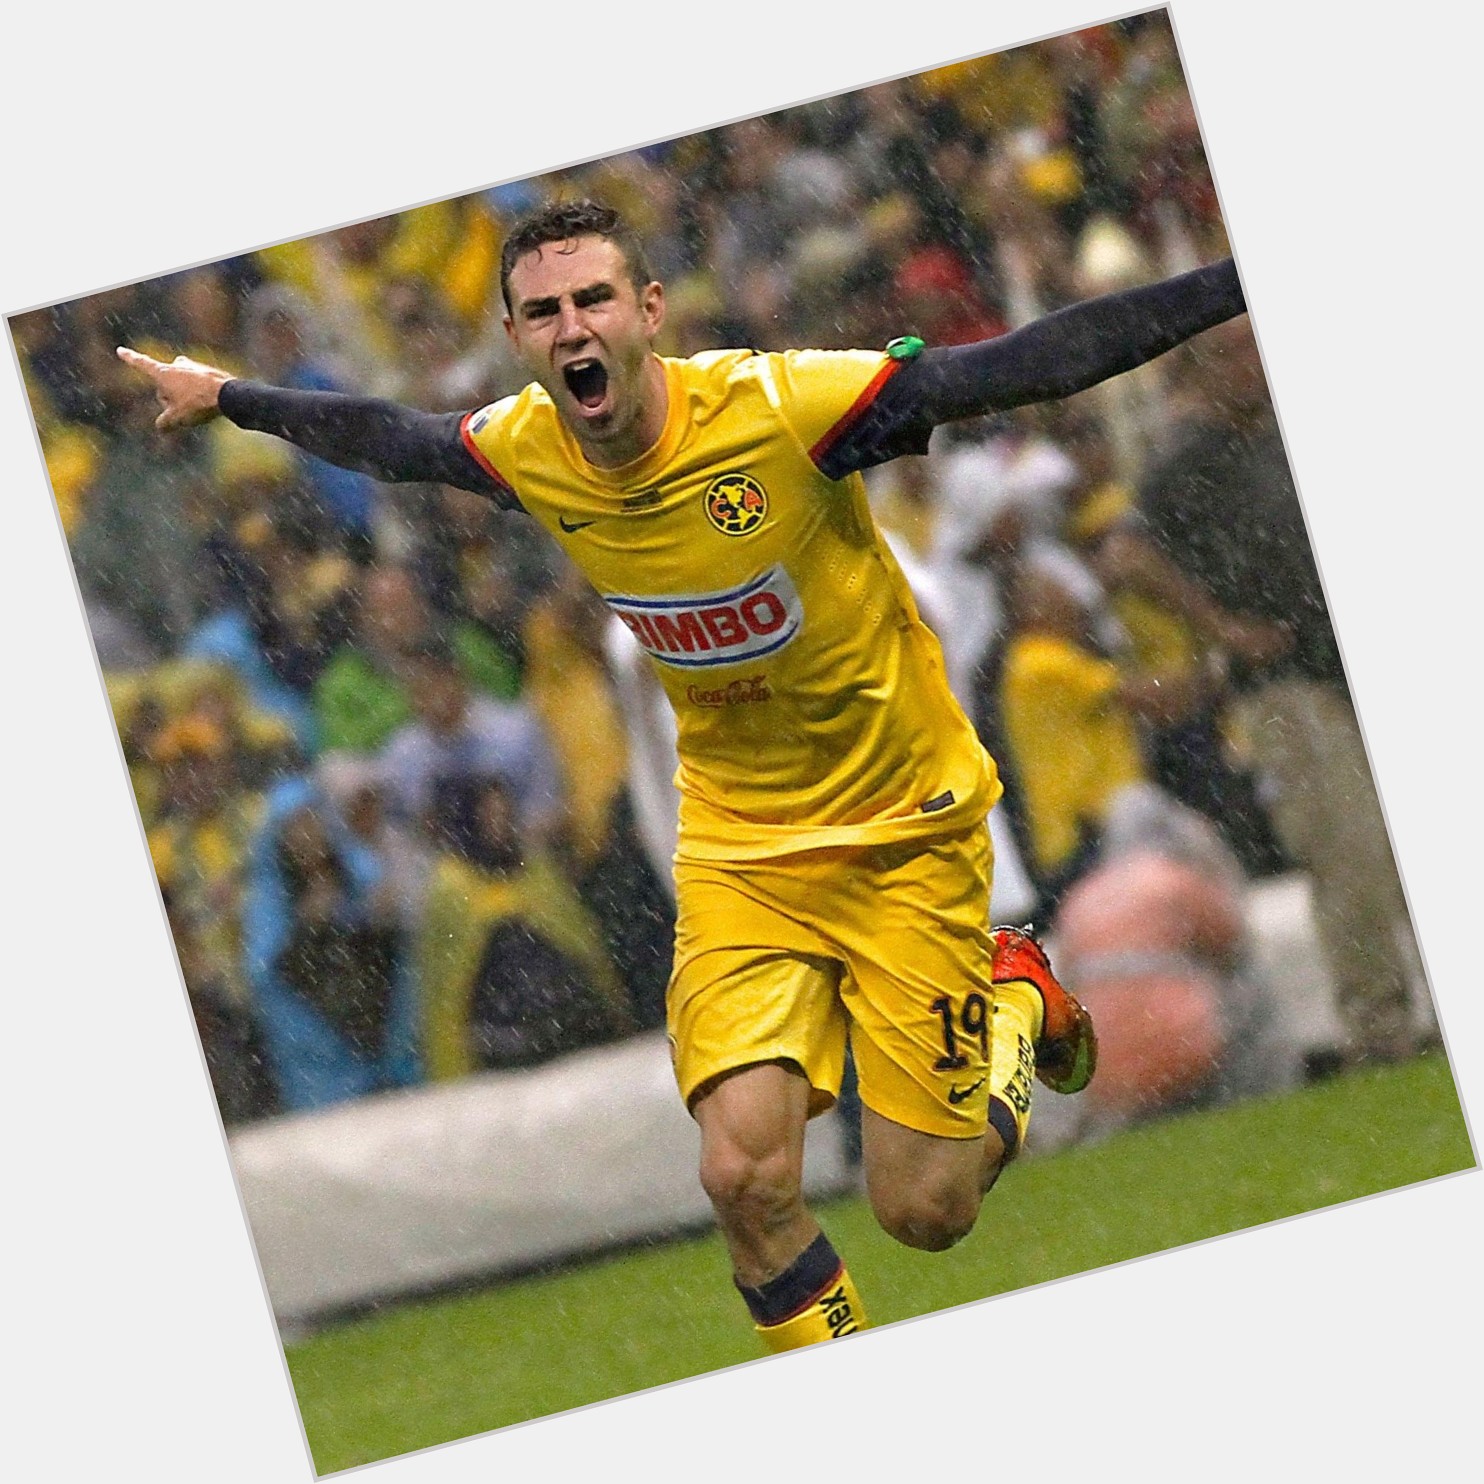 Miguel Layun light brown hair & hairstyles Athletic body, 